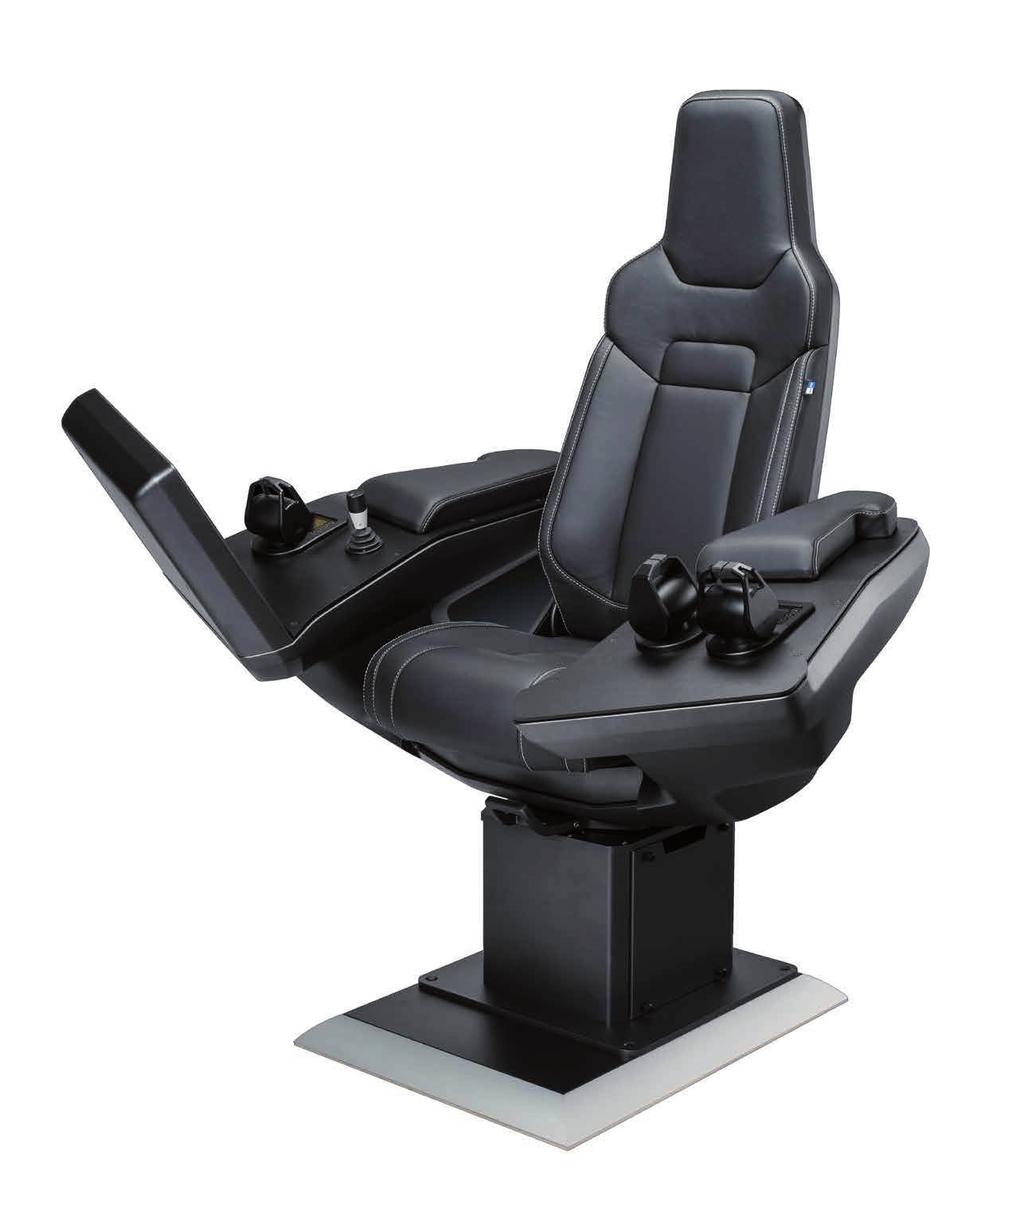 NorSap AS is the leading manufacturer of helm, pilot and operator chairs for the maritime market and several other niches.